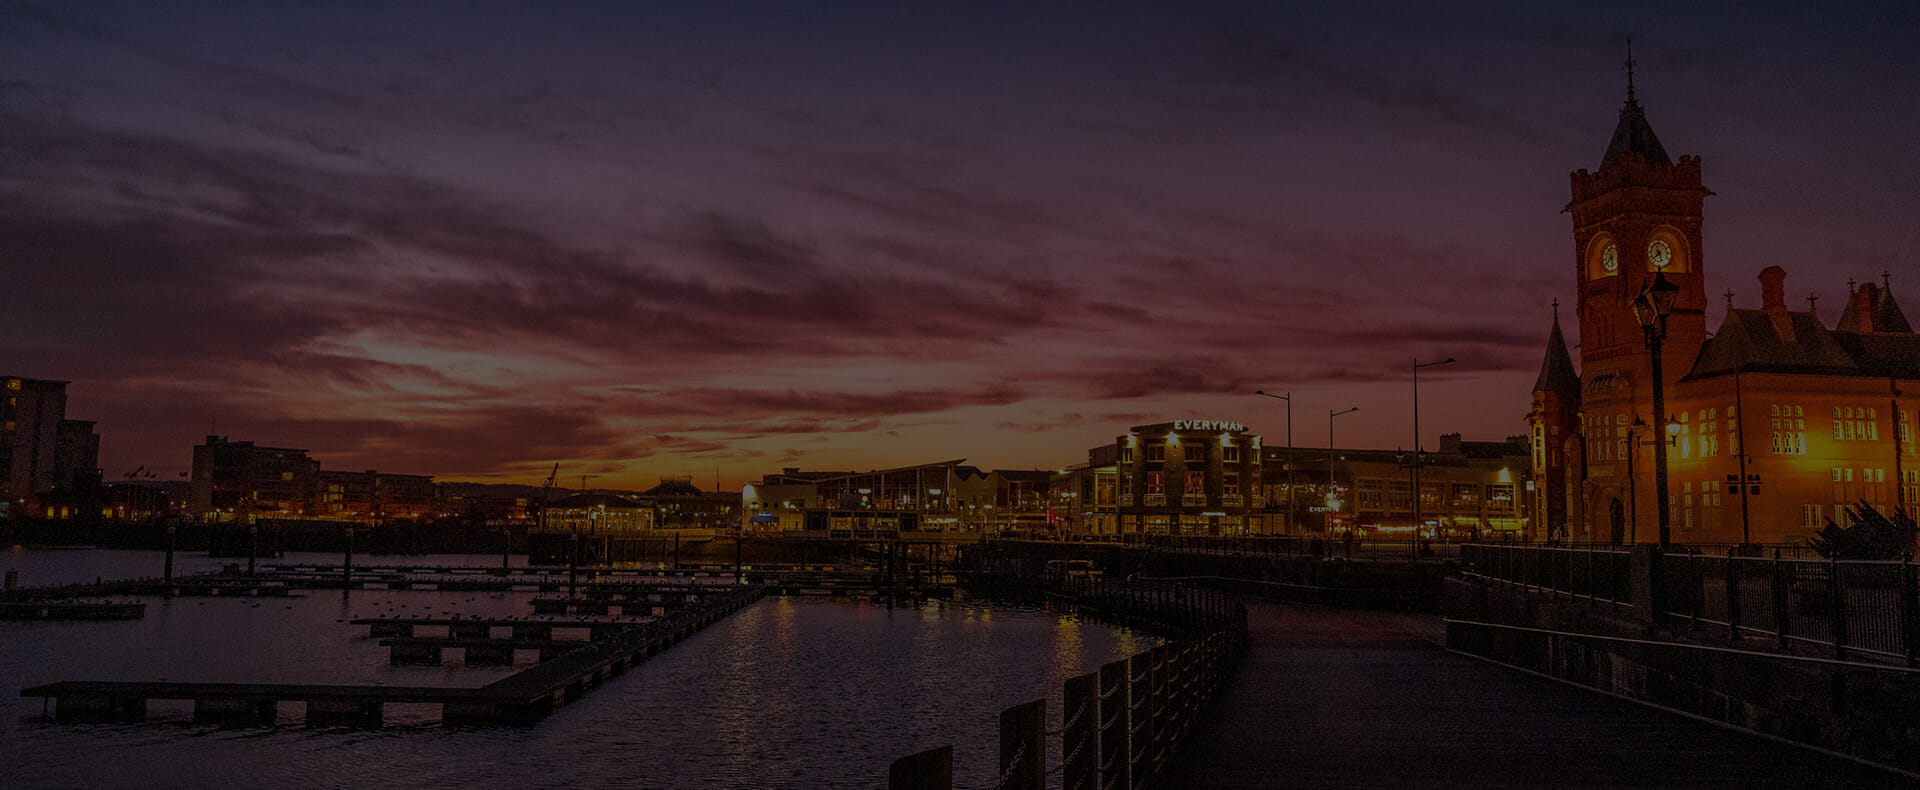 cardiff city bay at night with building lit up by the river taff with a sunset sky